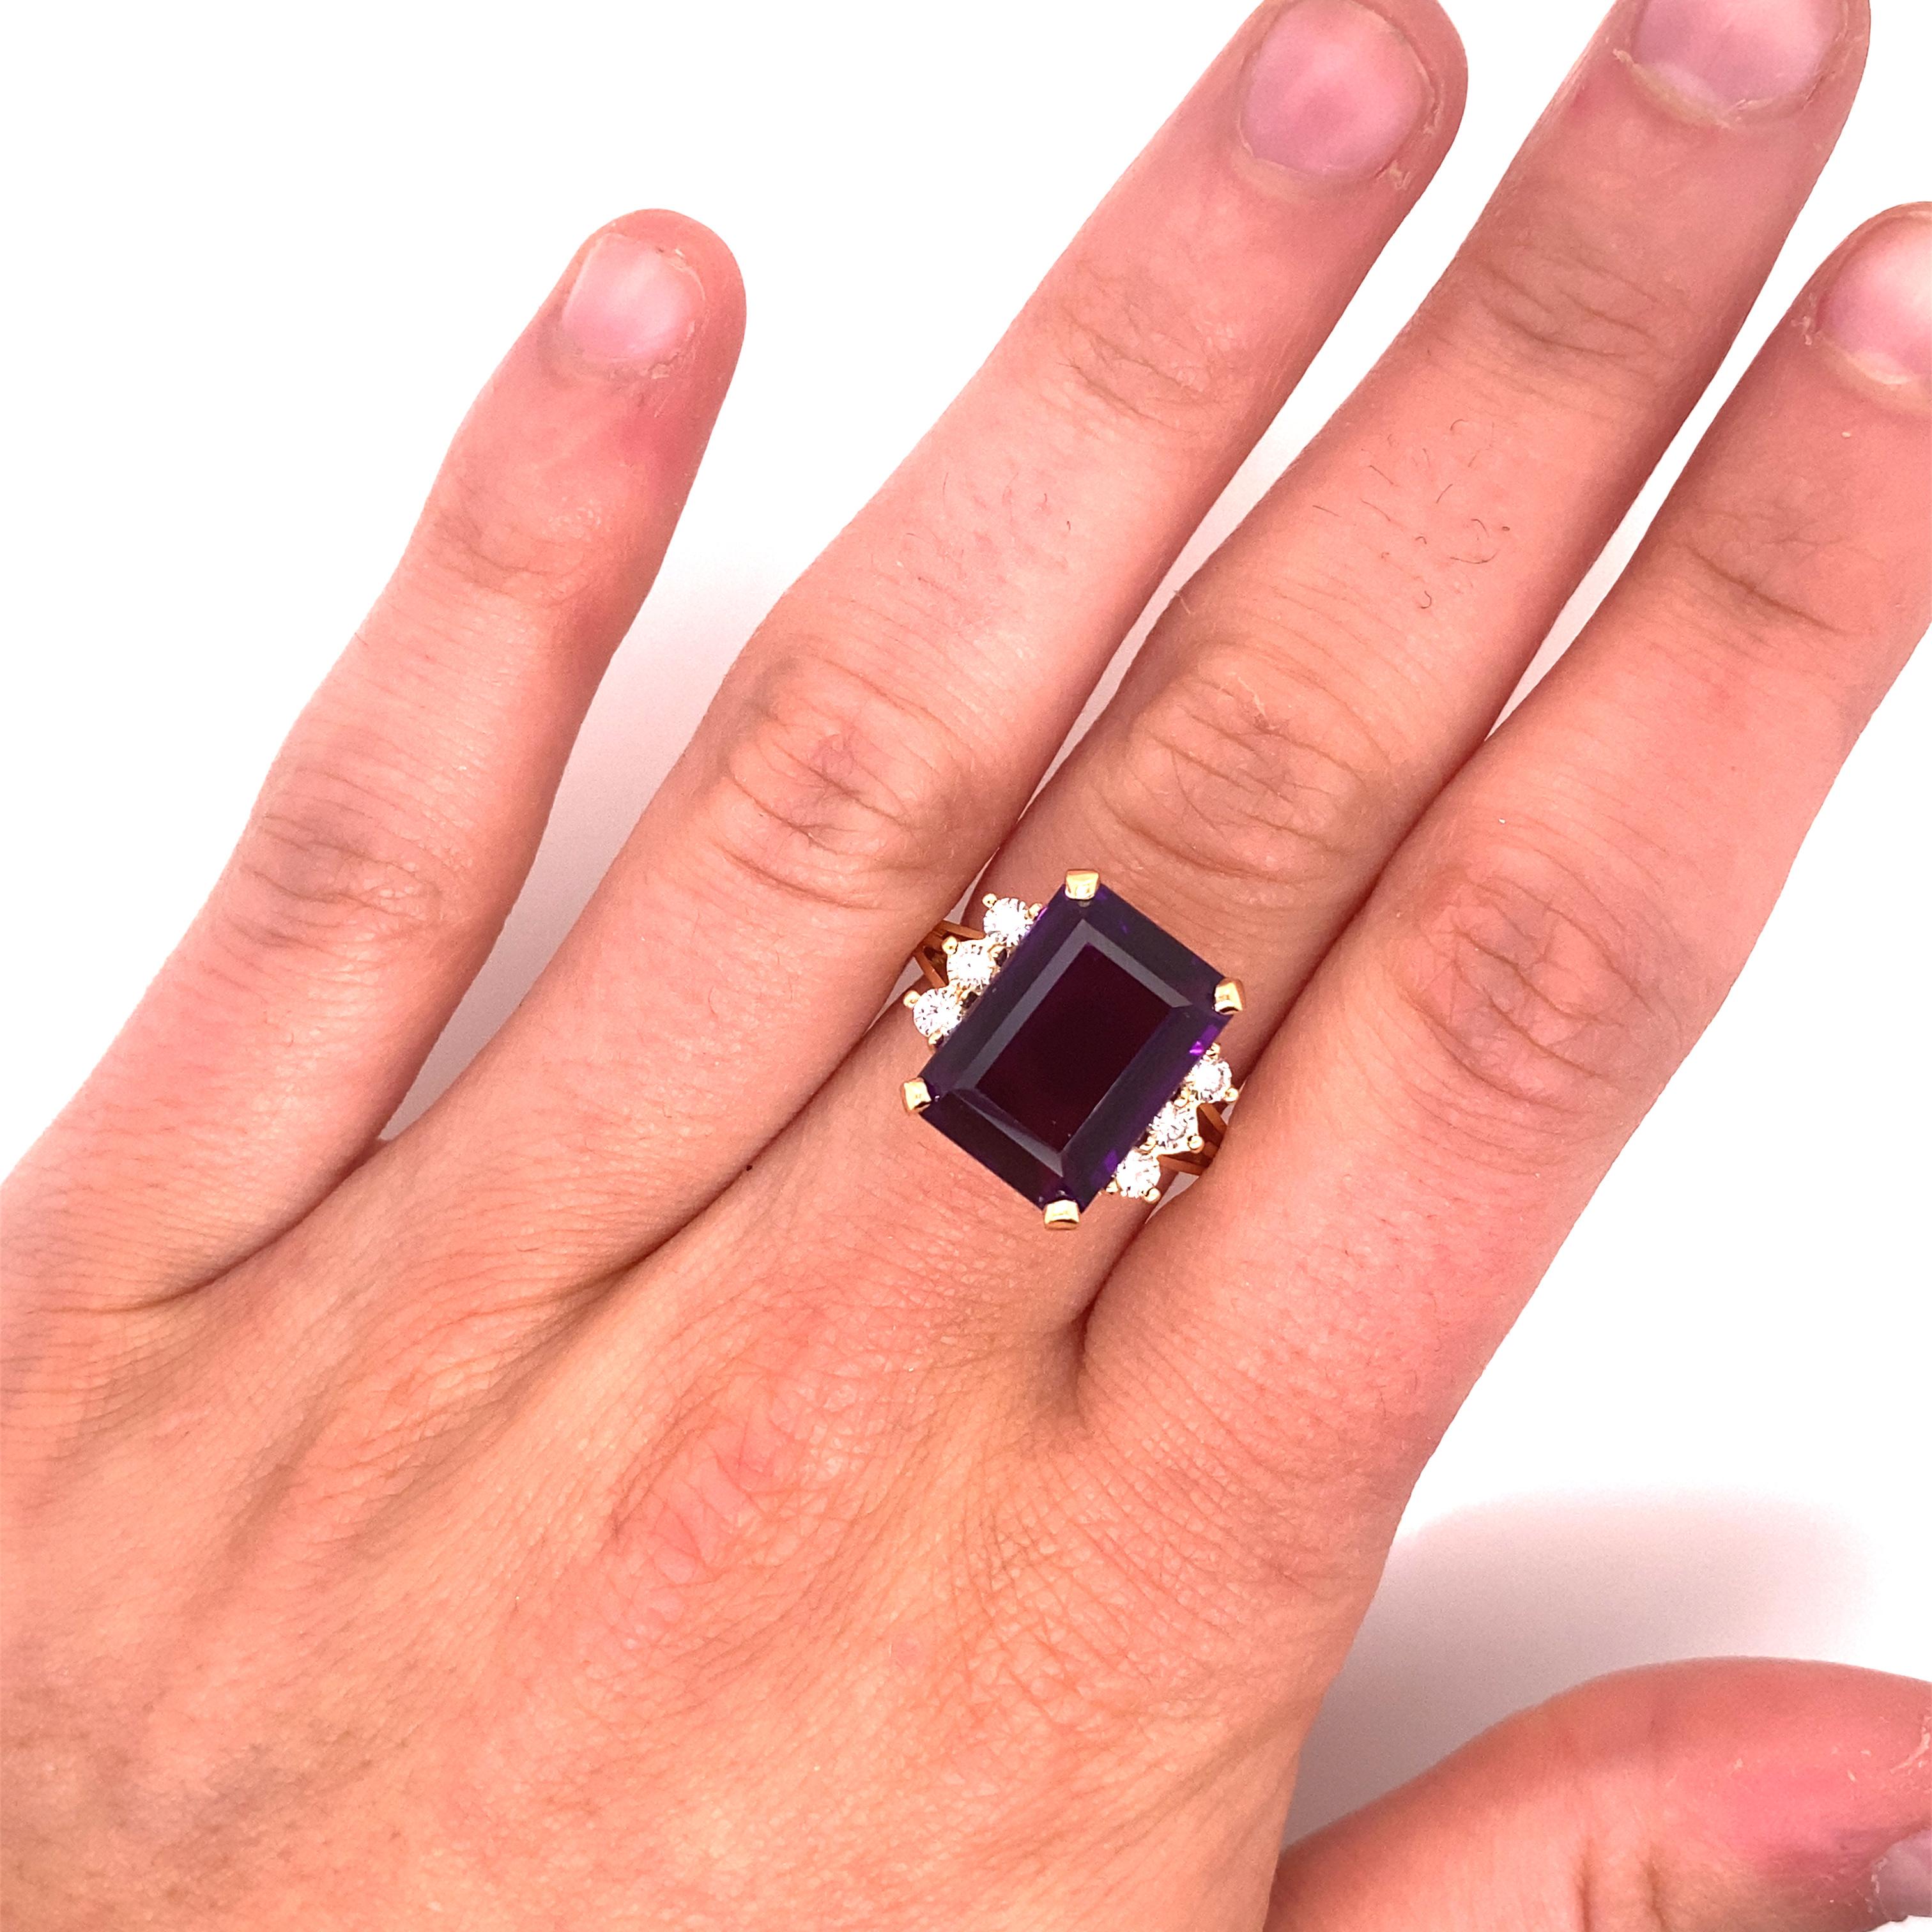 Vintage 1980's 7.35ct Emerald Cut Amethyst Ring with Diamonds 2